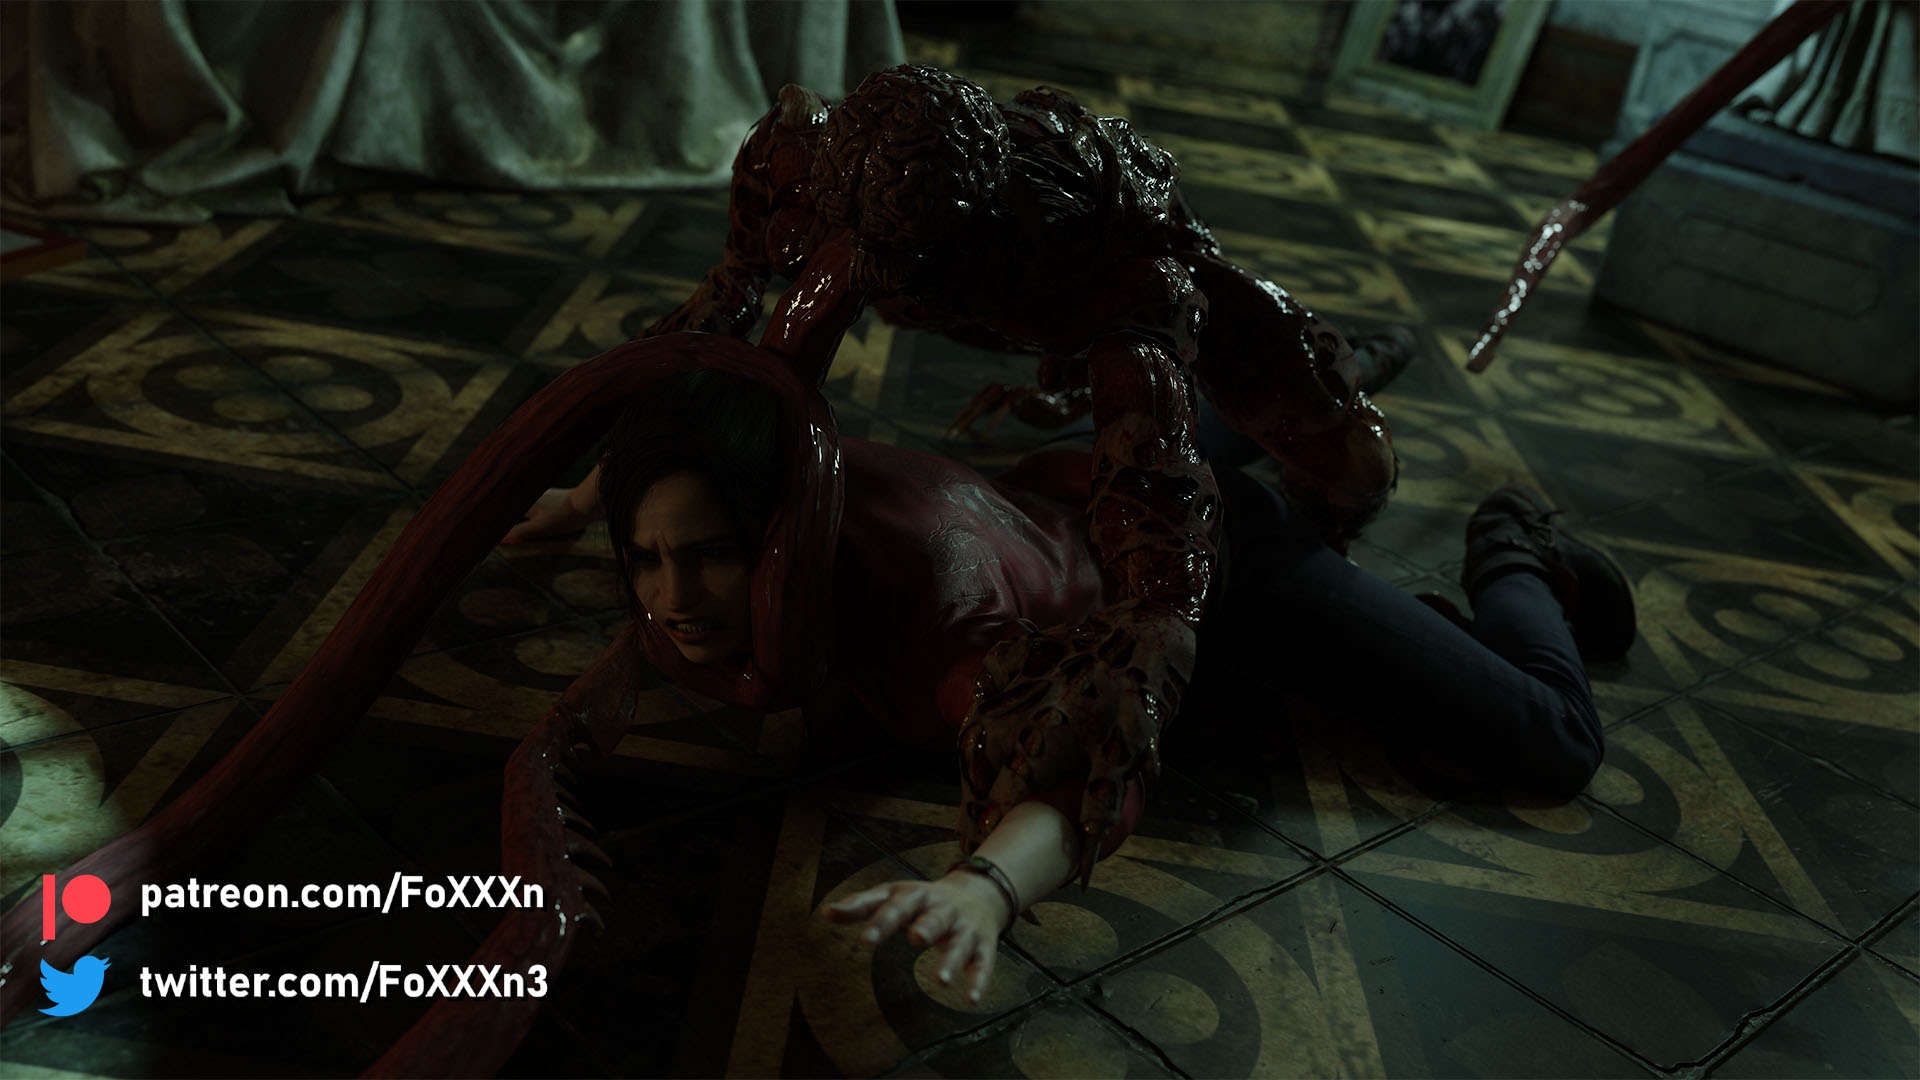 Licker Ambush Jill Valentine Claire Redfield Resident Evil Resident Evil 3 Remake Resident Evil 2 Remake Licker Naked Clothed Monster Caught Rape Tentacles Tentacle Tongue Tongue Out 4